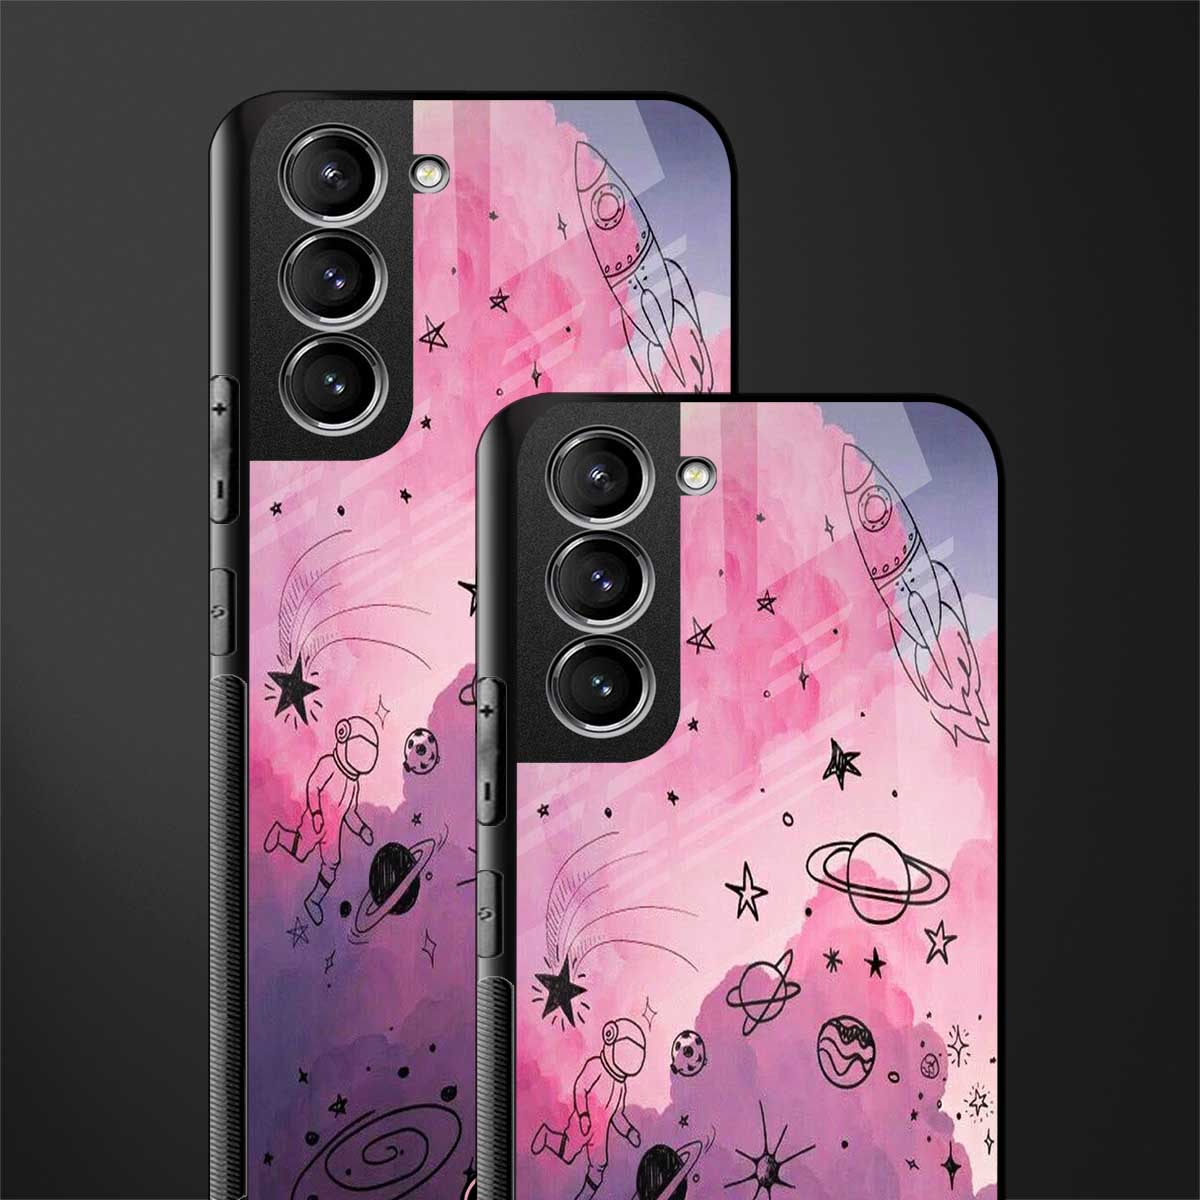 space pink aesthetic glass case for samsung galaxy s21 plus image-2